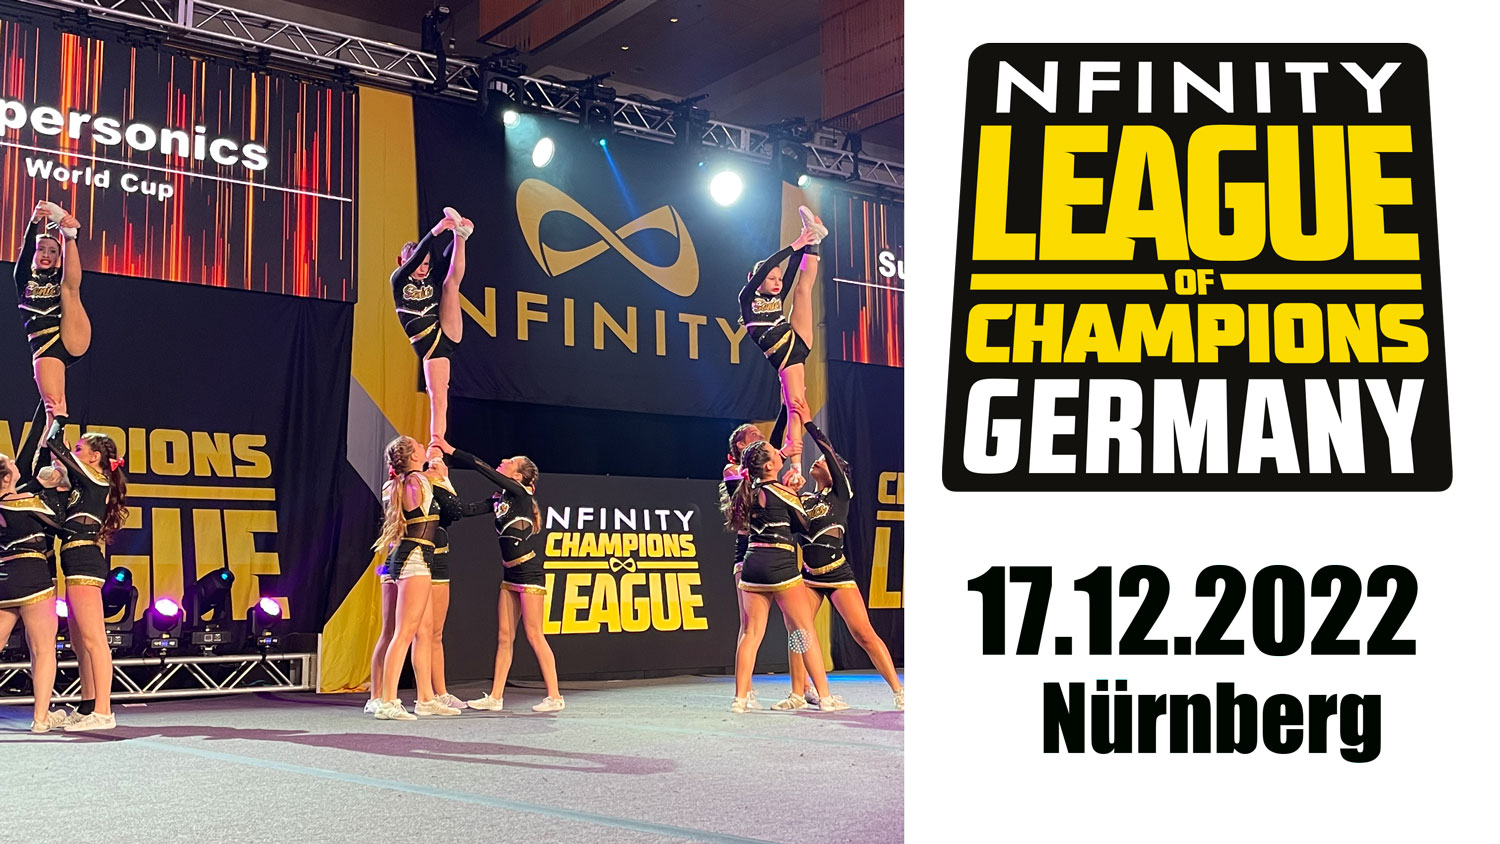 Nfinity League of Champions Tickets